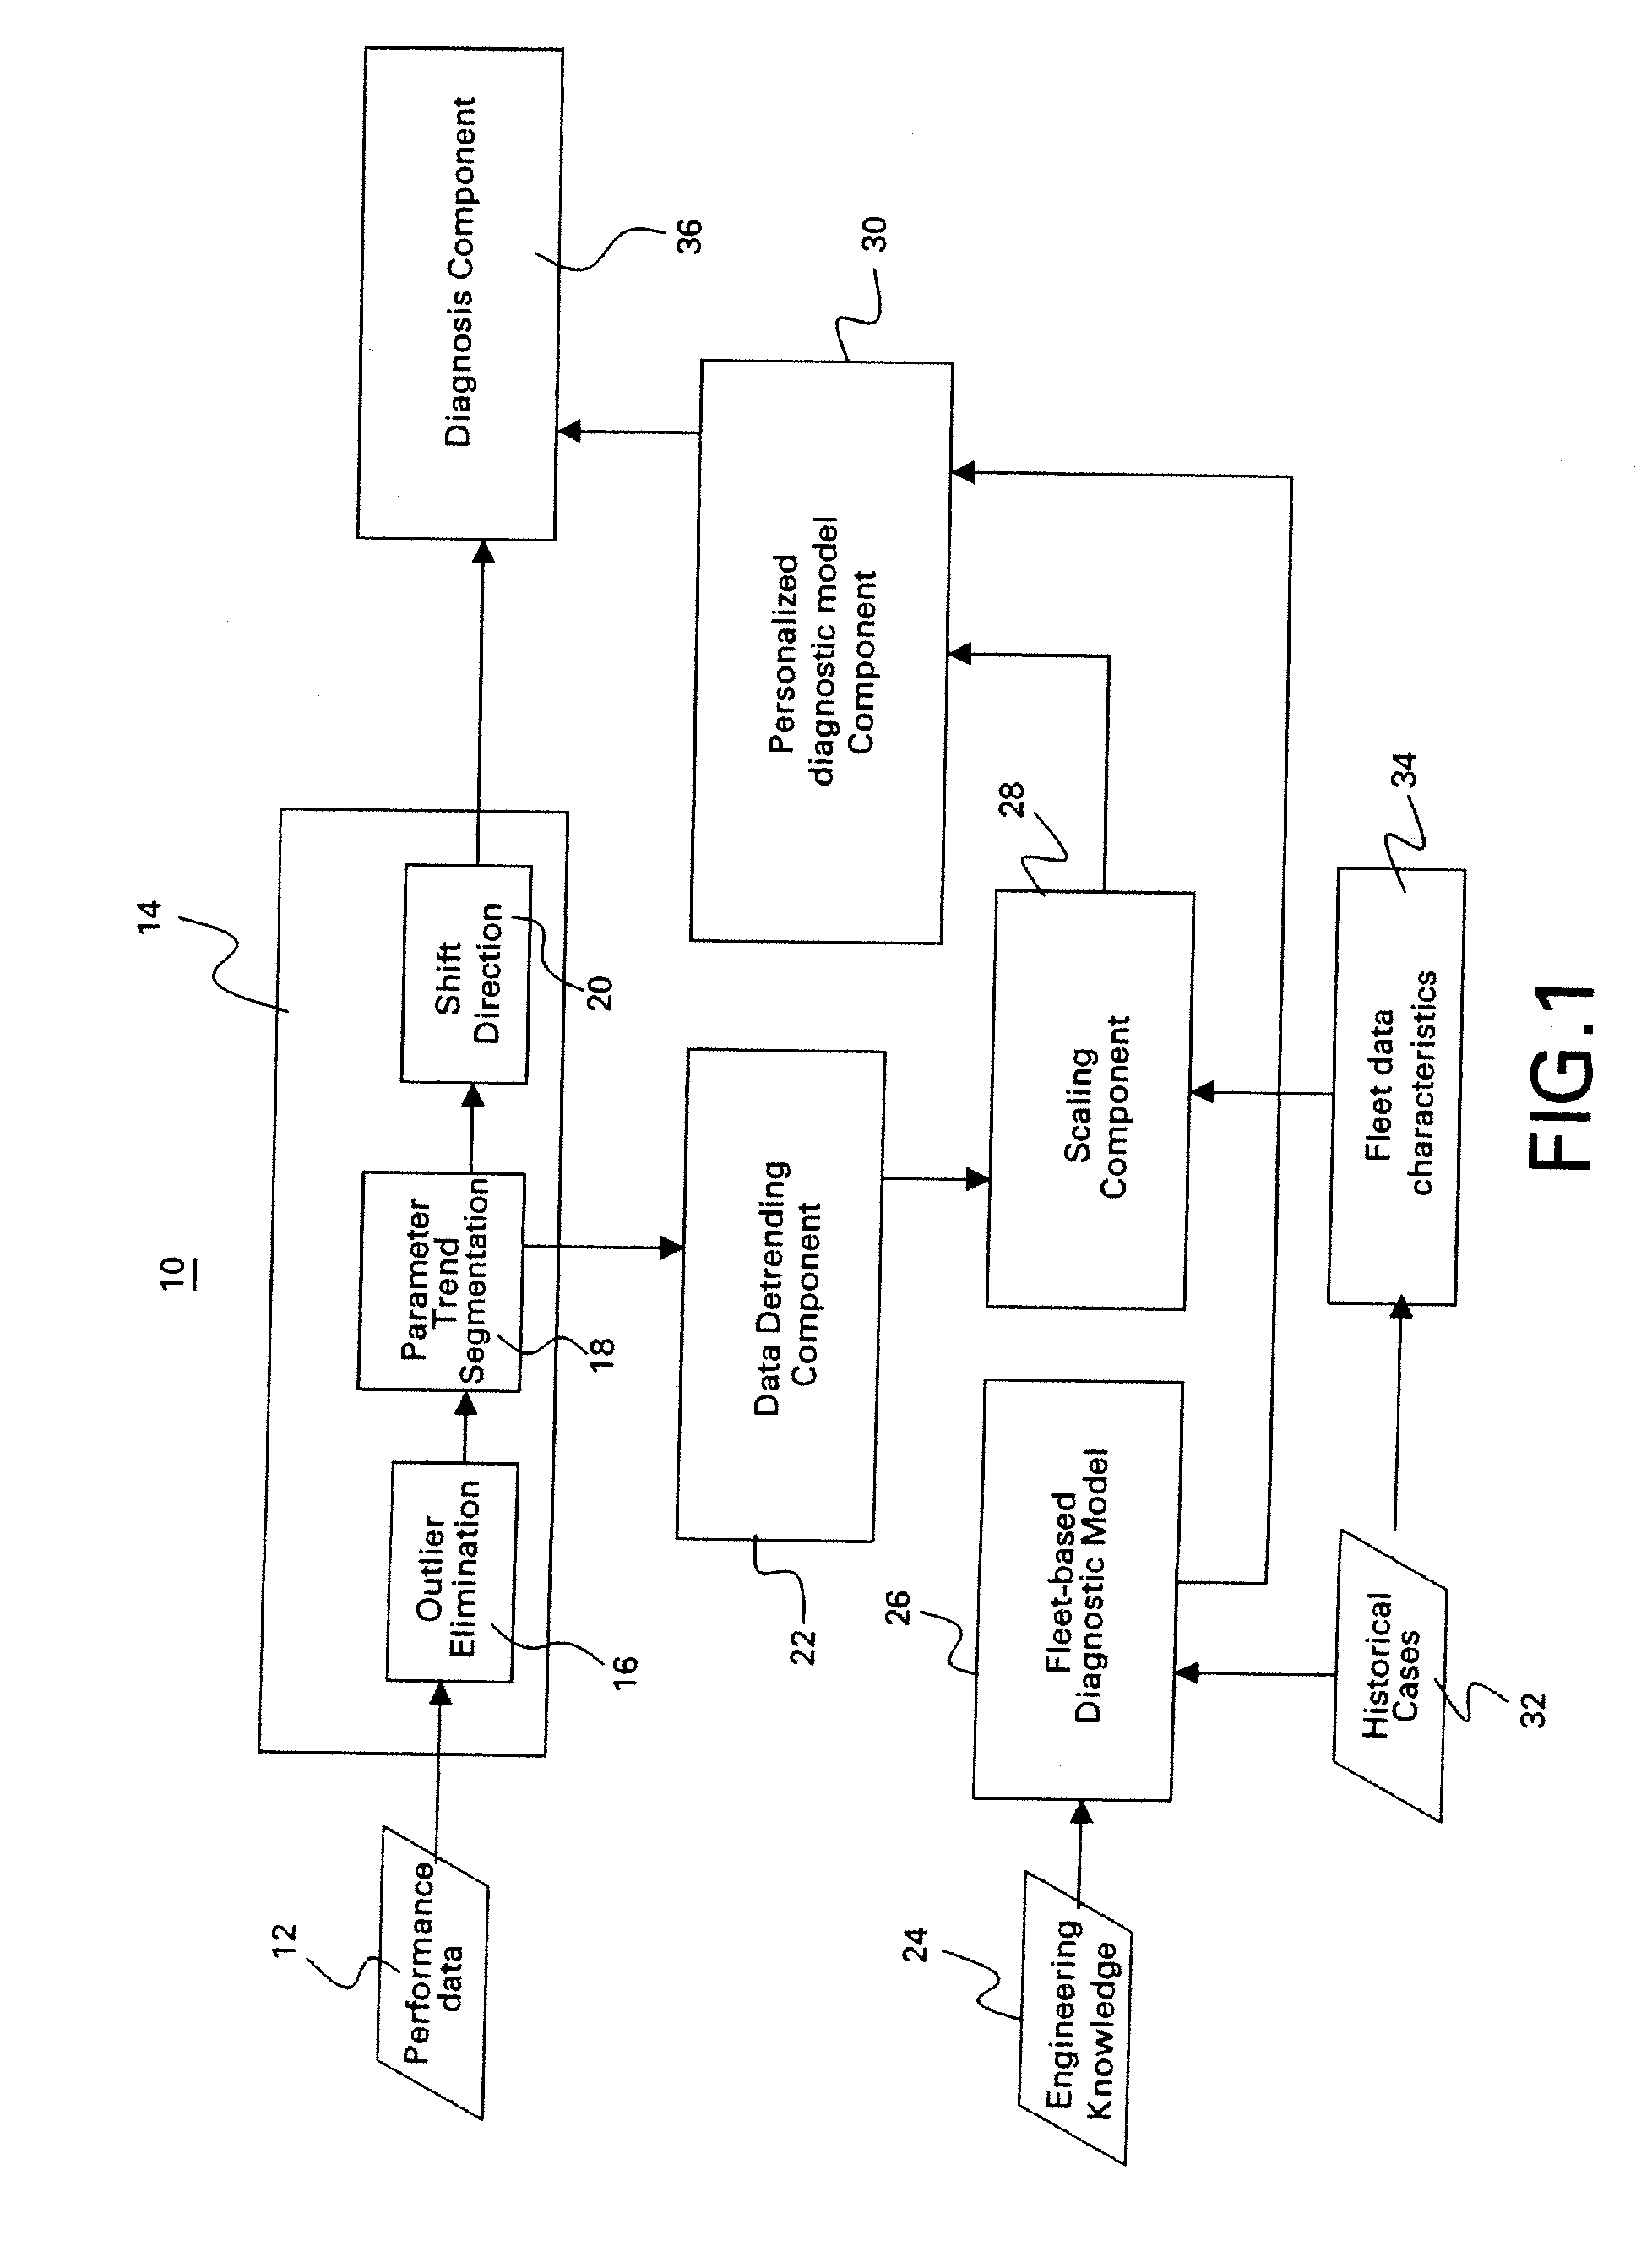 Method and system for diagnosing faults in a particular device within a fleet of devices